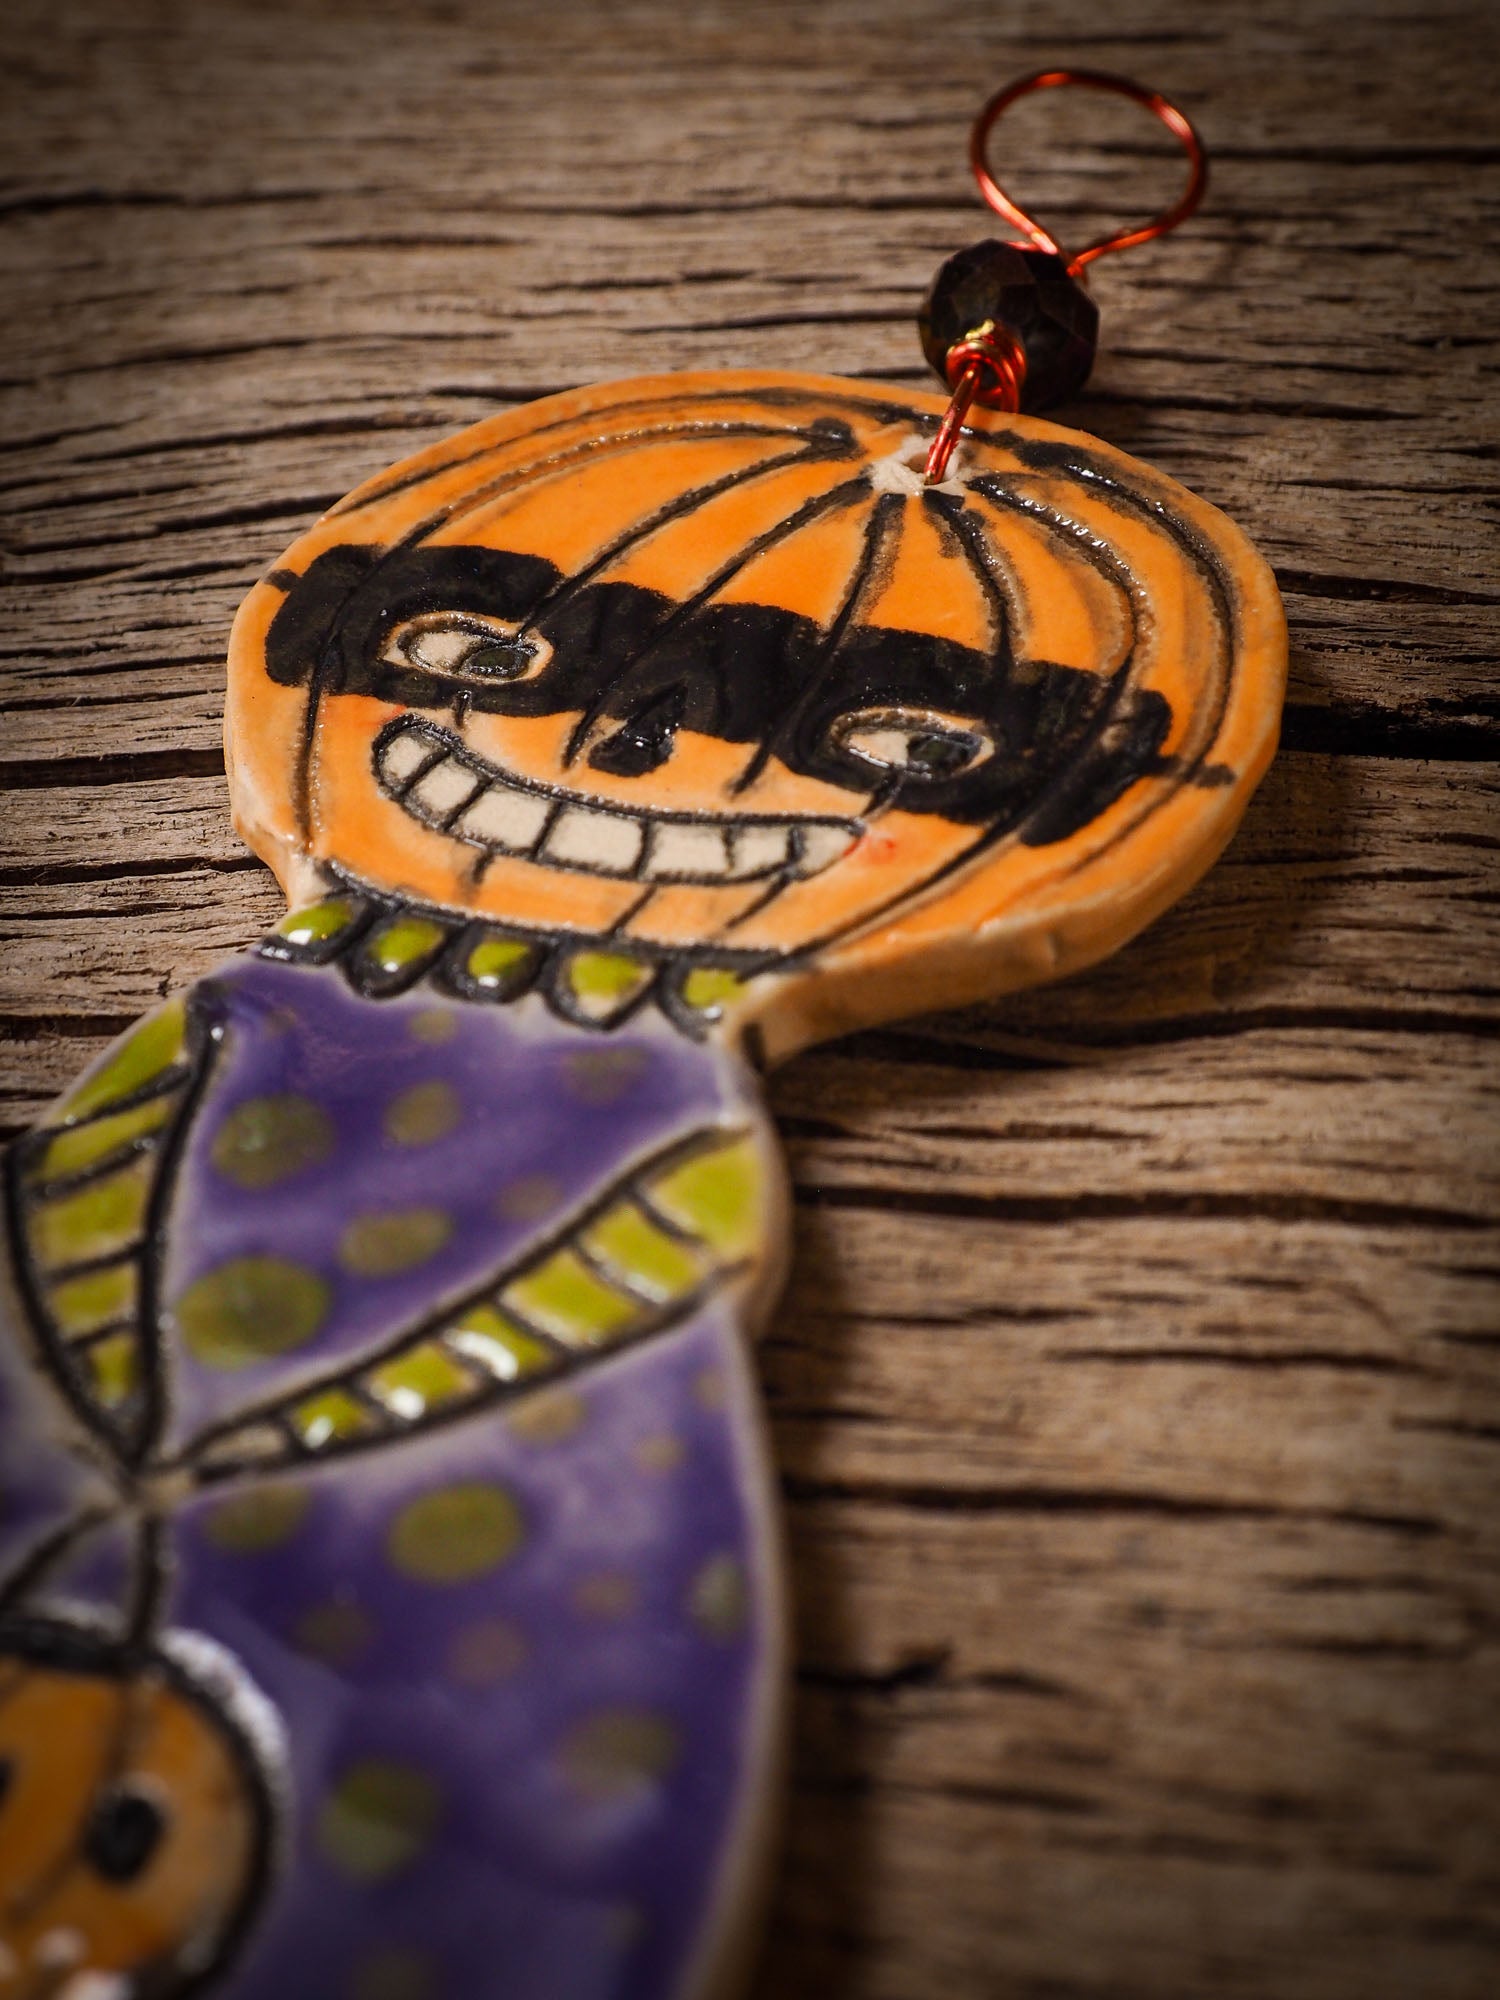 An original handmade Halloween ornament by Idania Salcido, Danita Art. Each ornament is hand carved with pumpkins, witches, cats, jack-o-lanterns and moons.  Made with fired glazed ceramics, this little witch, jack-o-lantern and cat is carved with delicate patterns that make each ornament a one of a kind work of art.